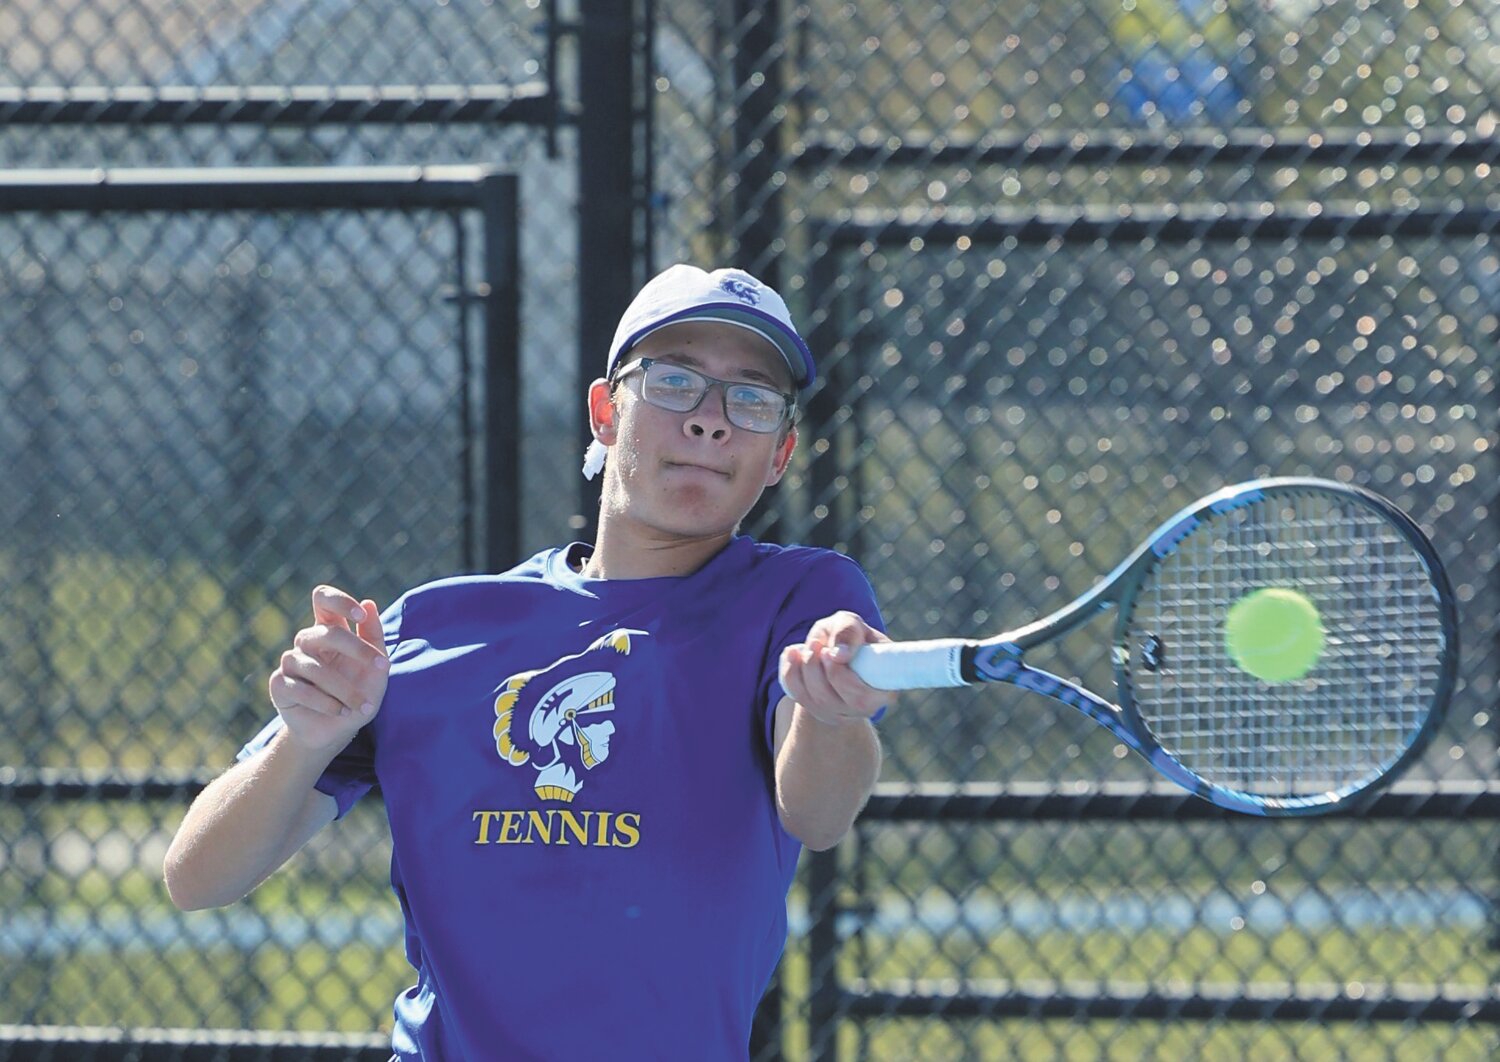 Crawfordsville senior James Murphy came back from an early season plantar fascia injury to help lead the Athenian tennis team to their second straight sectional title.